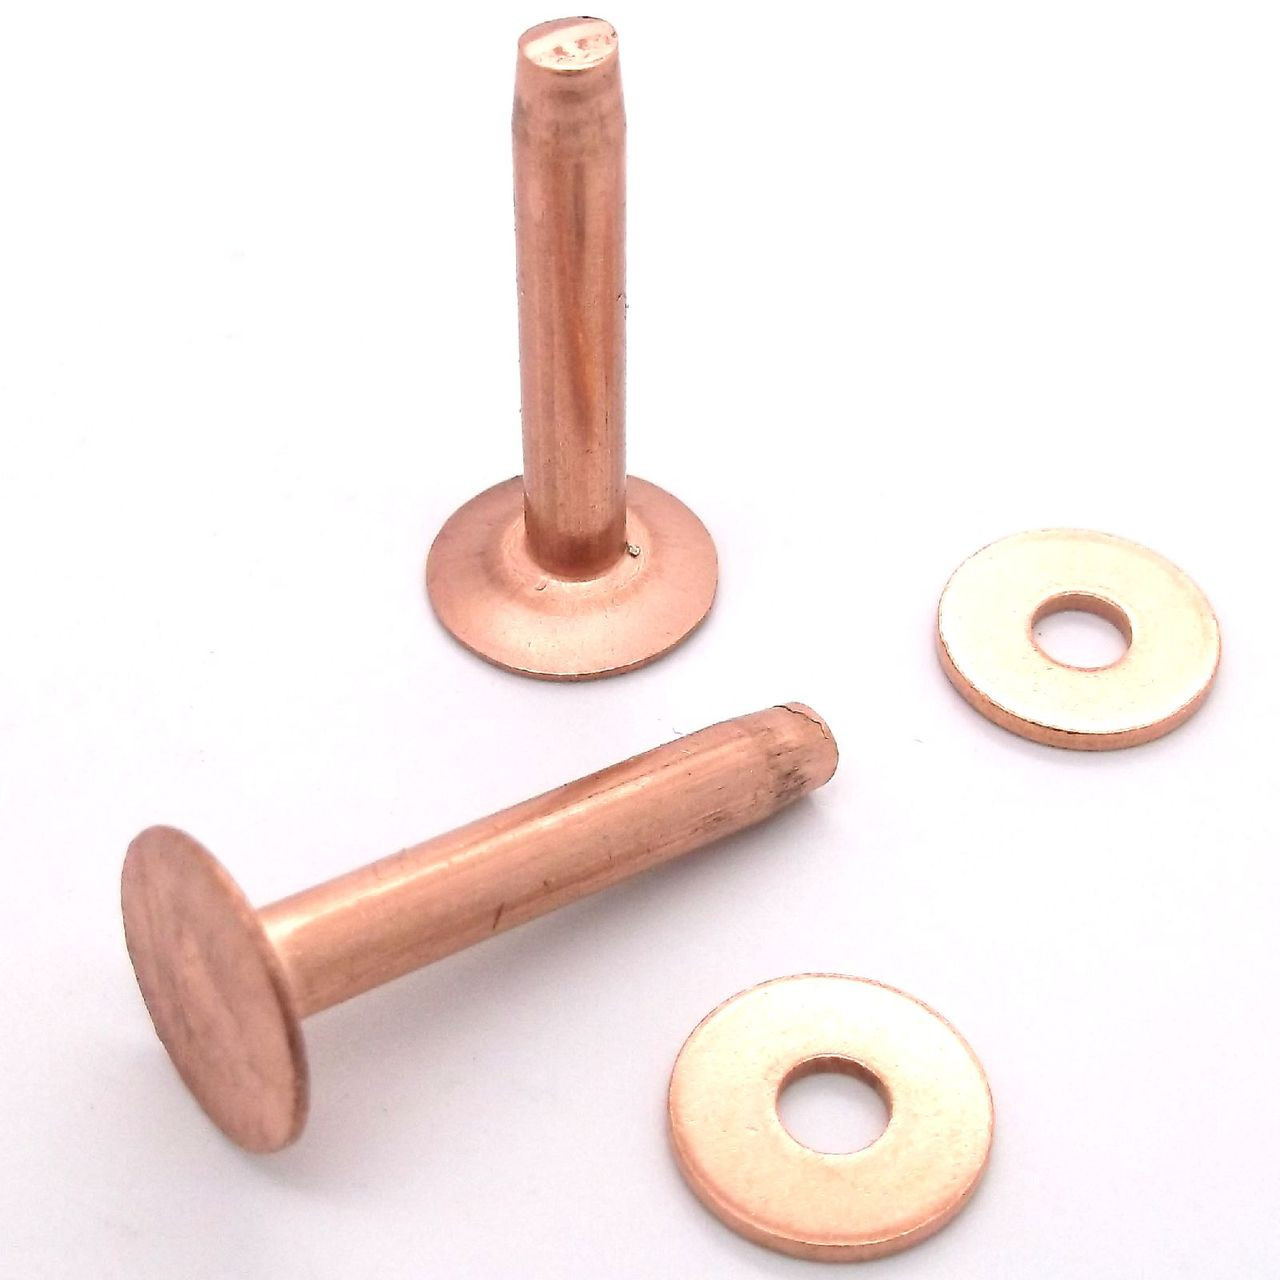 Tandy Leather 1 Pack of 50 #9 Copper Rivets & Burrs